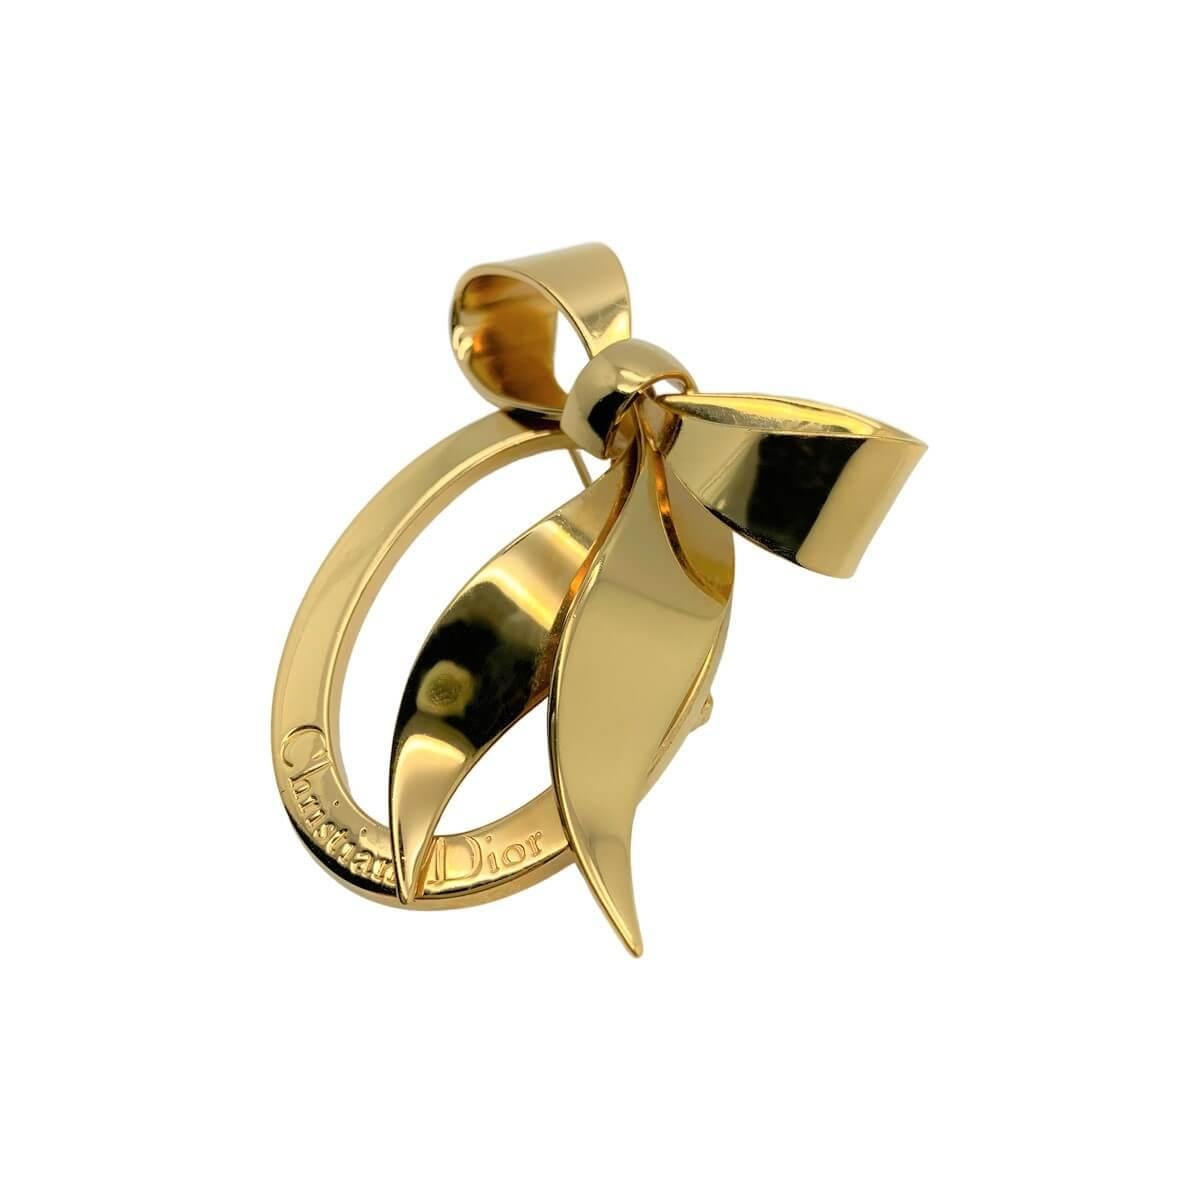 A heavenly vintage Dior bow brooch. Featuring a large oval embellished with the name of the iconic House of Dior and finished top perfection with a large stylised floppy bow, one of fashions greatest and most timeless motifs.
With archive pieces